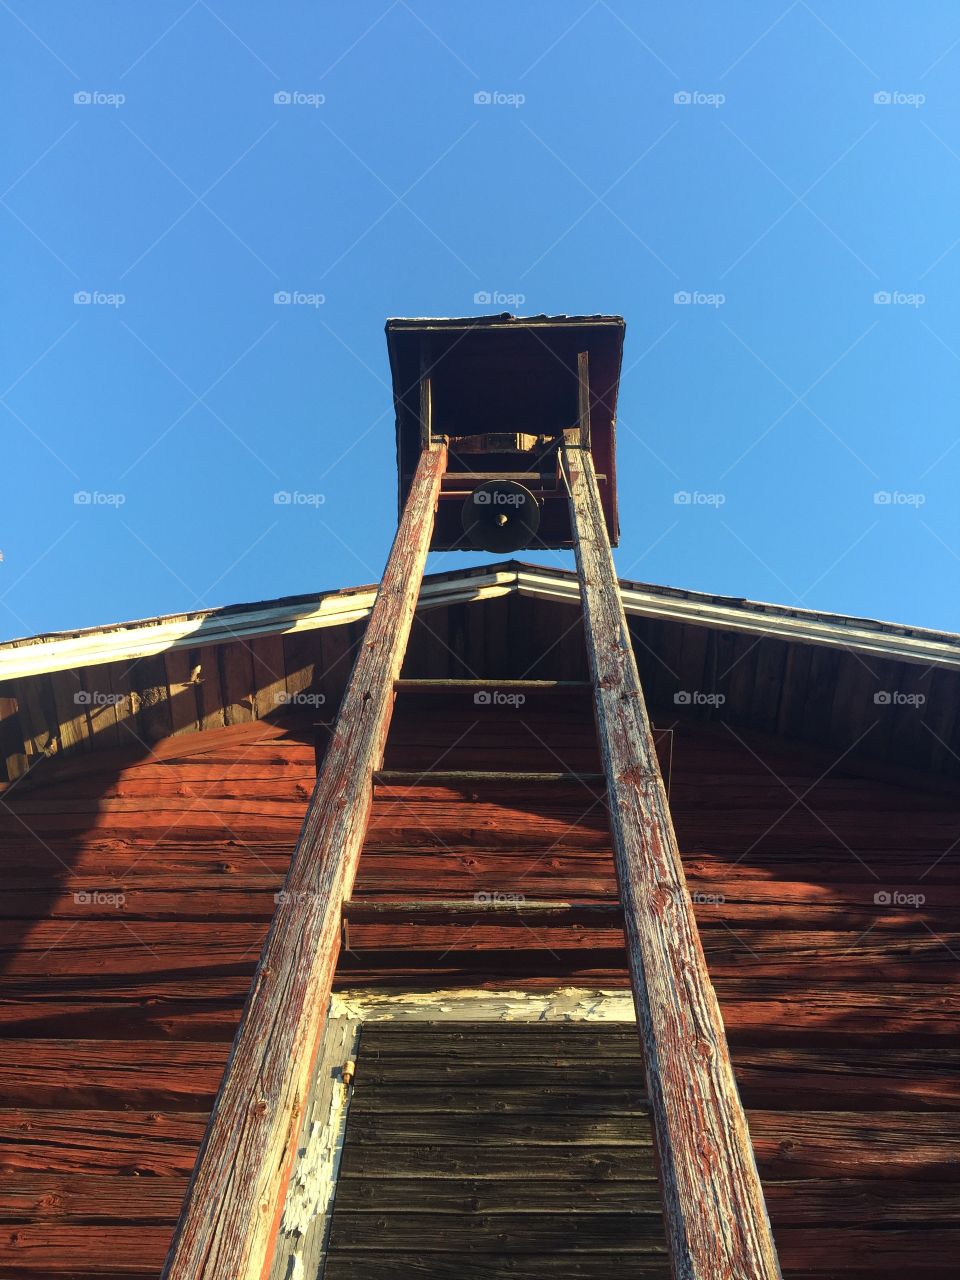 Fire bell. Wooden tower with bell